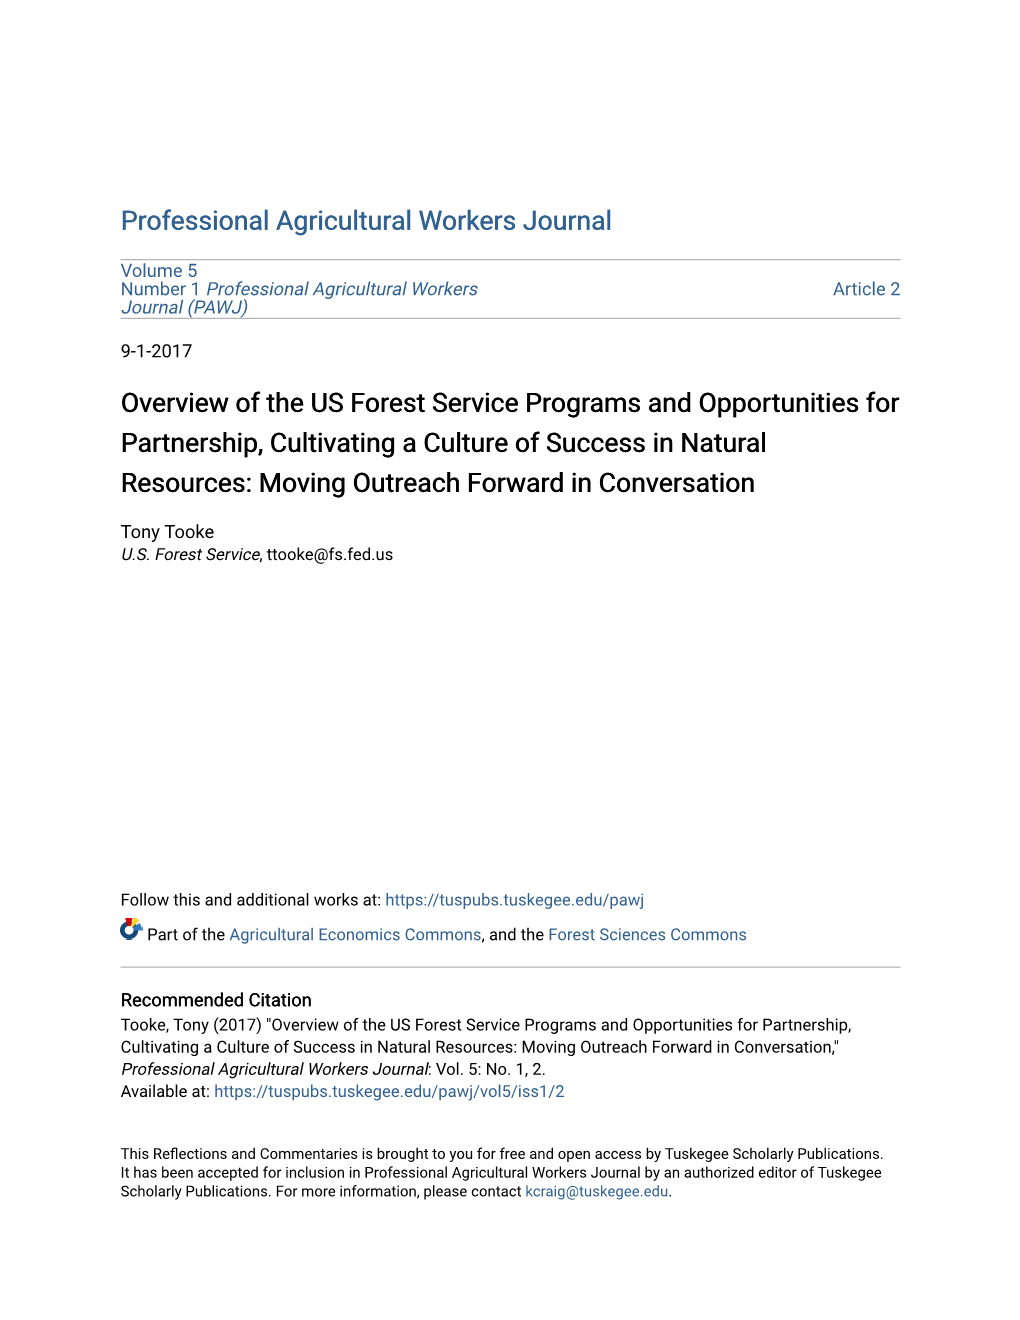 Overview of the US Forest Service Programs and Opportunities For